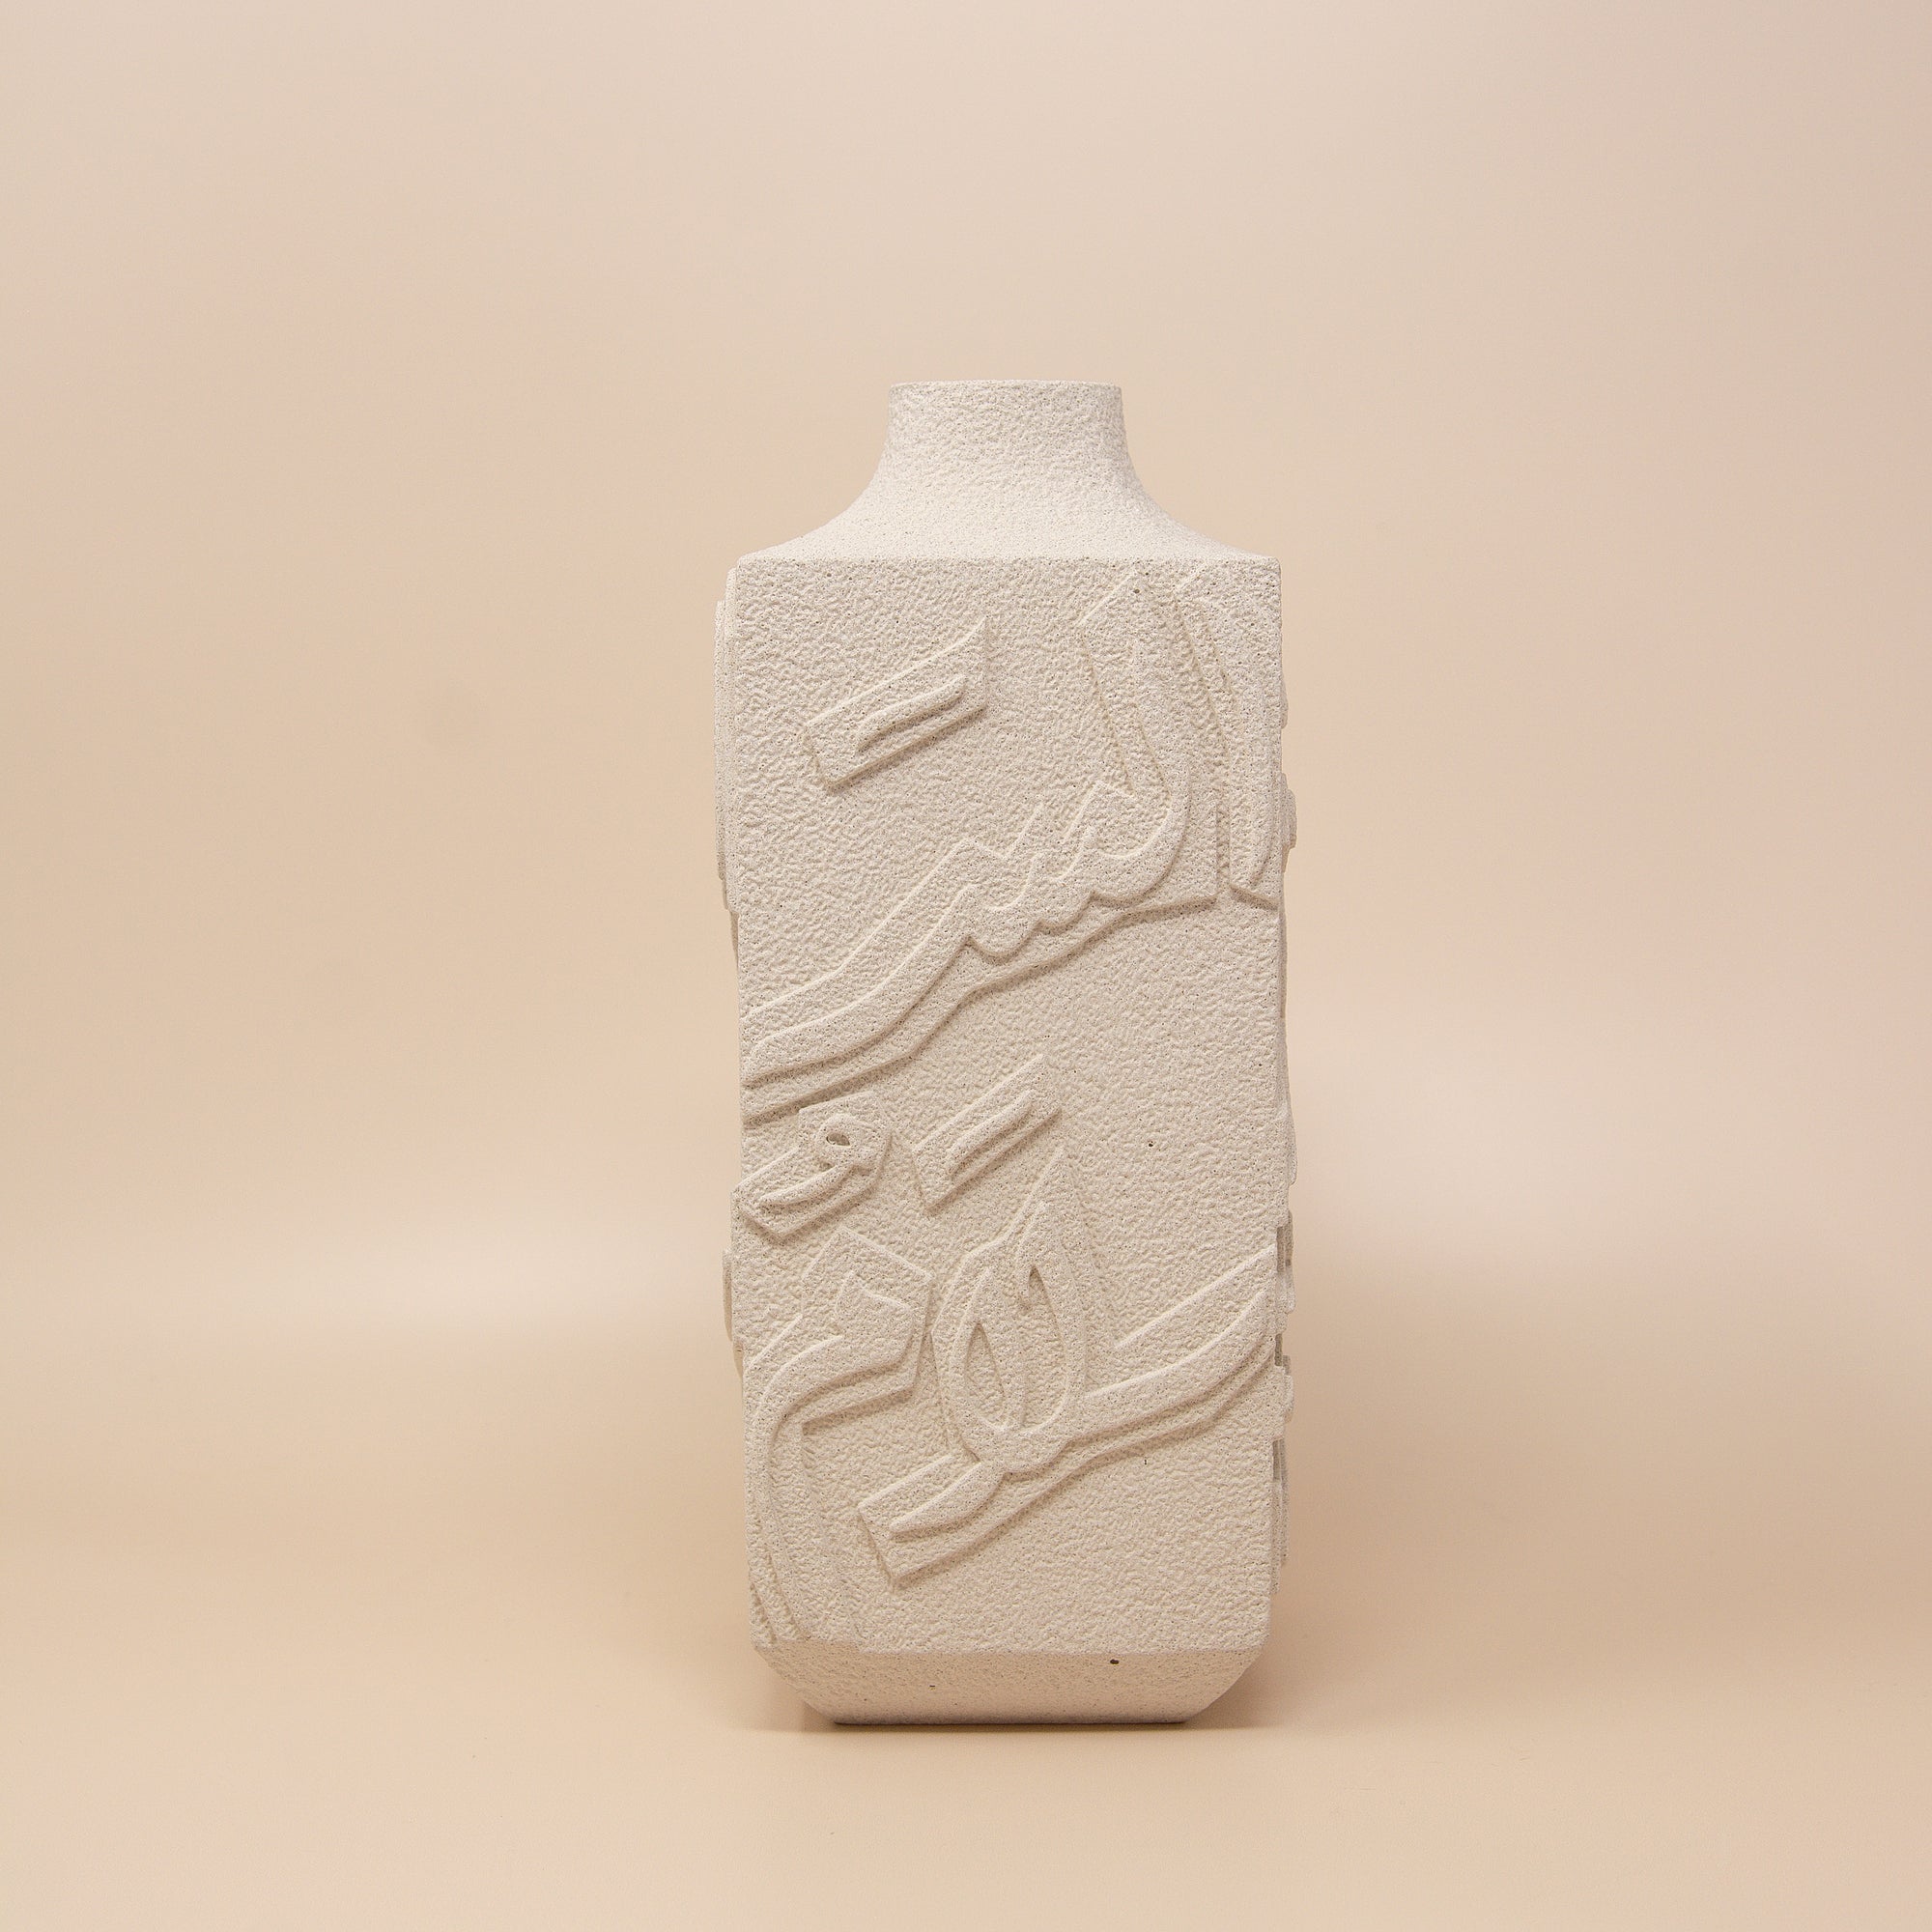 Artisan Handcrafted Calligraphy Vase